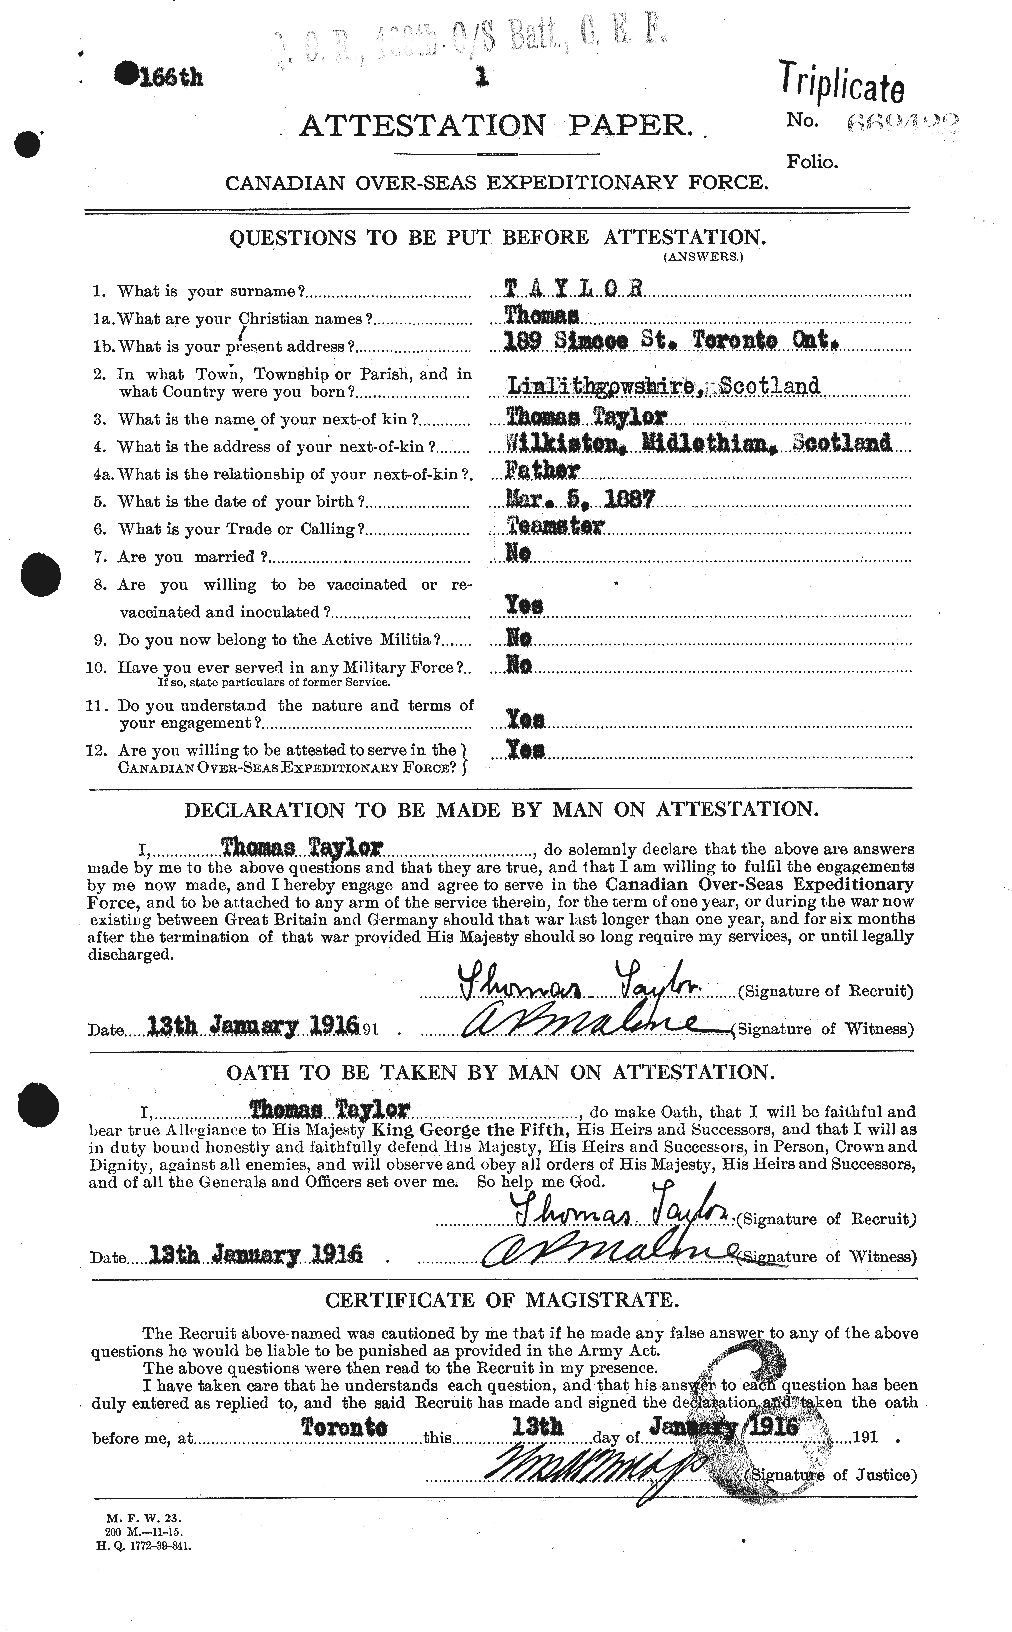 Personnel Records of the First World War - CEF 627964a